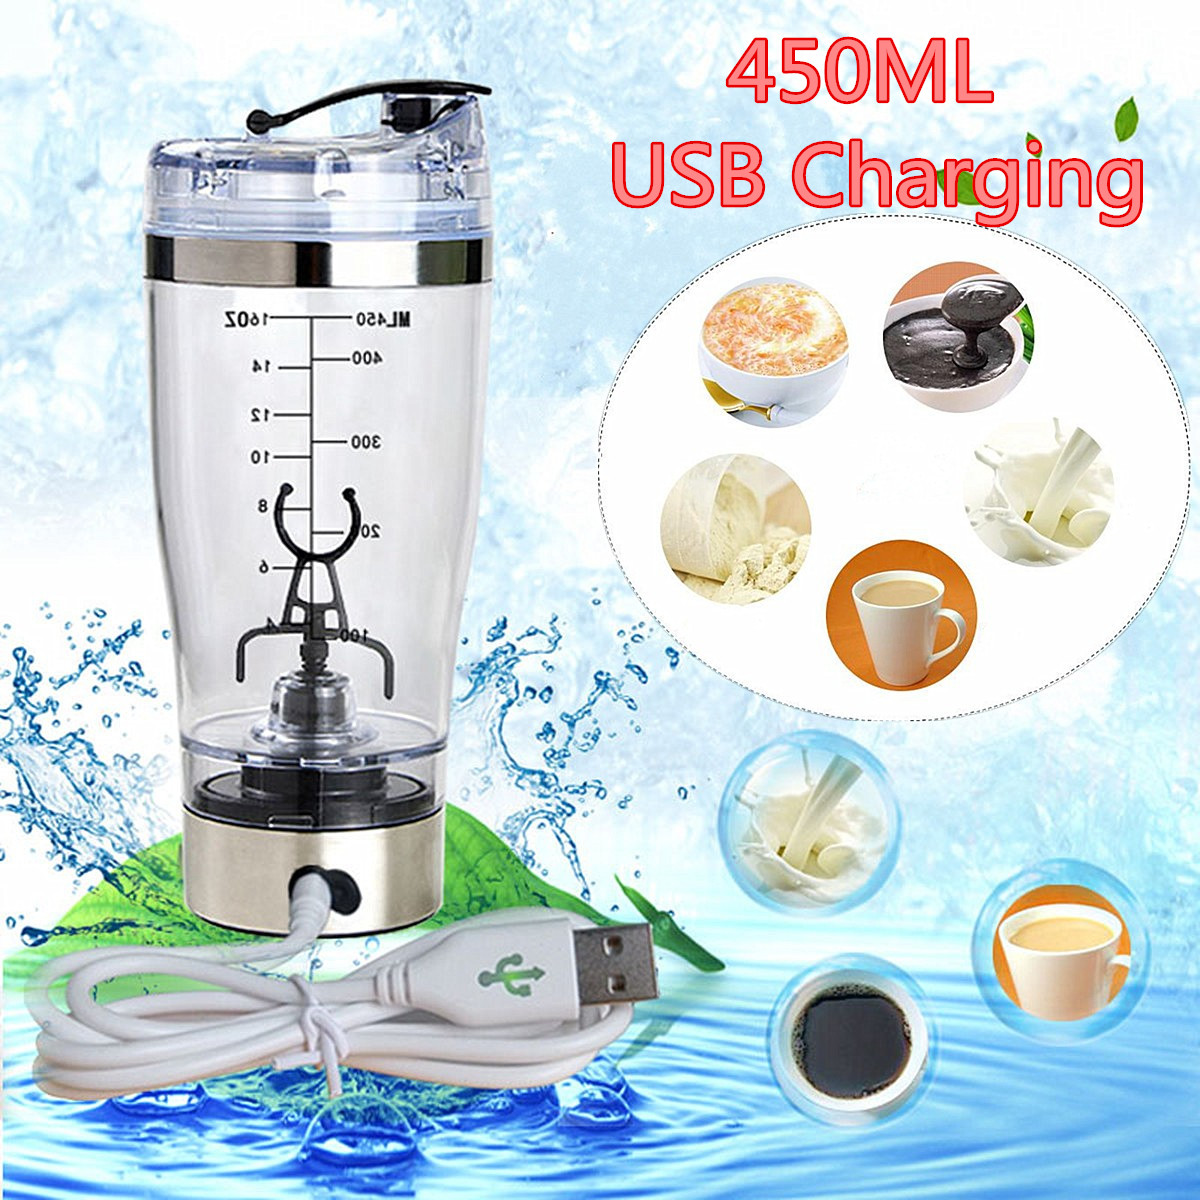 450ML-USB-Charging-Electric-Shaker-Cup-Blender-Detachable-Mixing-Cup-Fitness-Protein-Powder-Shake-Cu-1637799-3